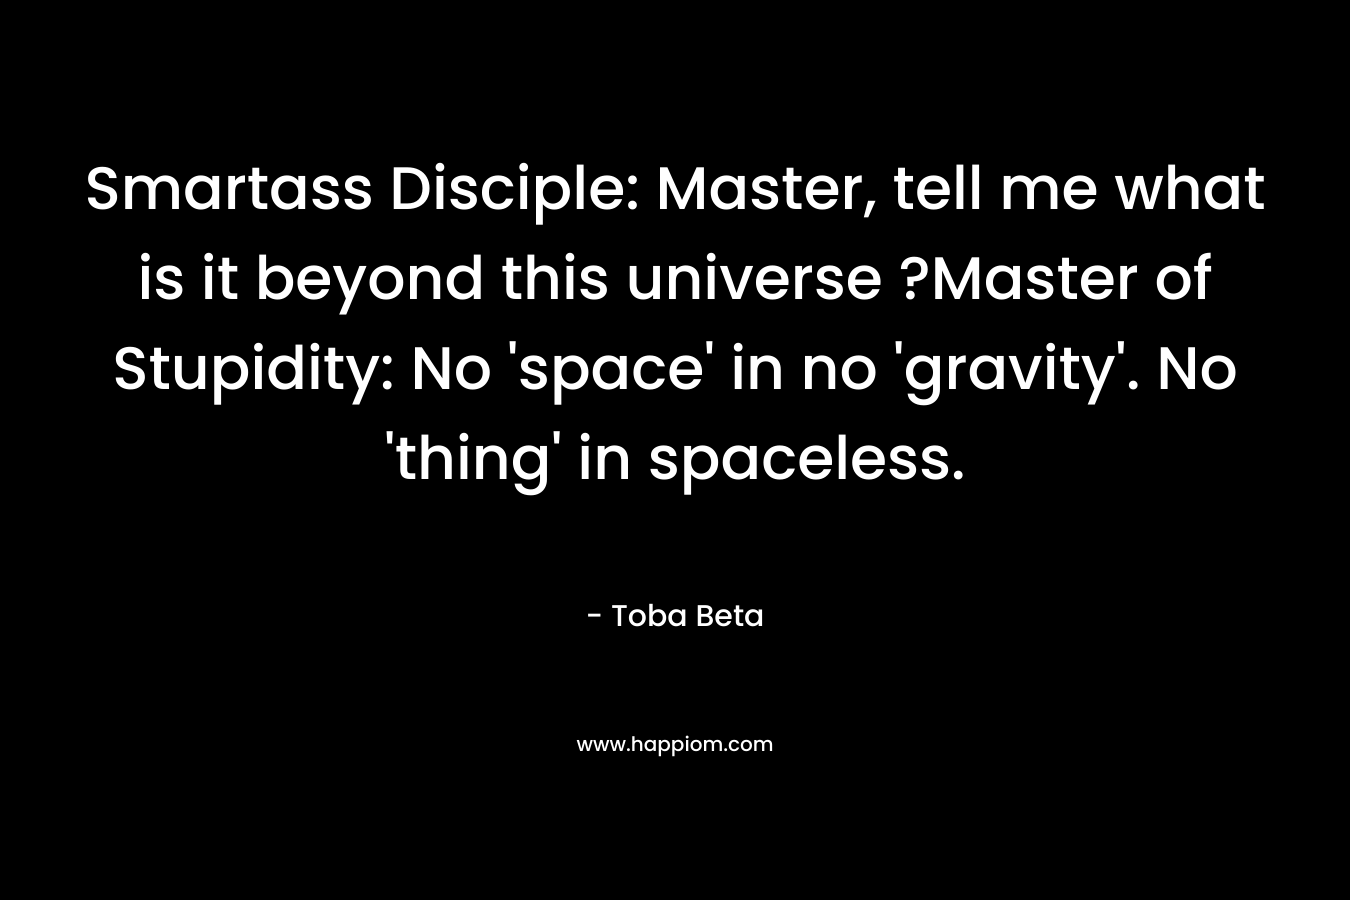 Smartass Disciple: Master, tell me what is it beyond this universe ?Master of Stupidity: No ‘space’ in no ‘gravity’. No ‘thing’ in spaceless. – Toba Beta